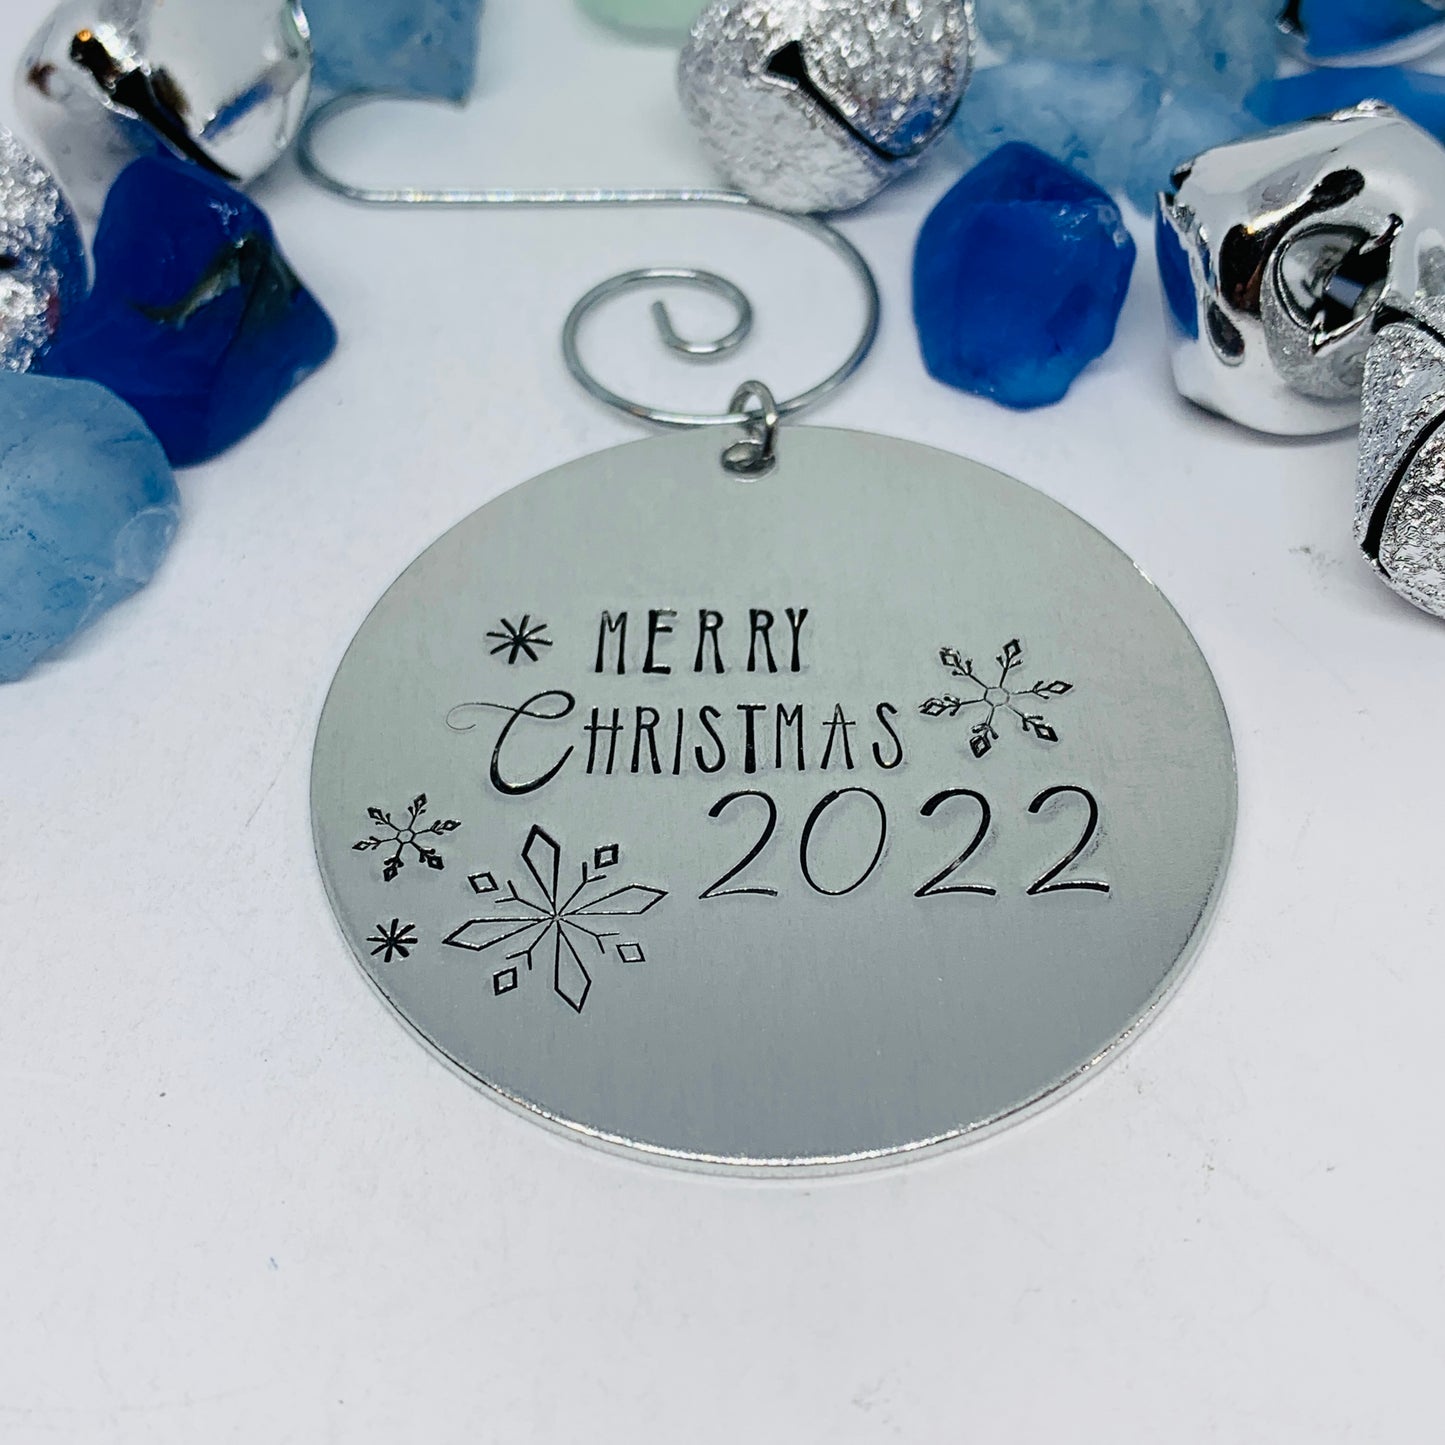 Merry Christmas 2022 Hand Stamped Ornament | Aluminum Round Snowflakes | Christmas | Hand Crafted Tree Decor | Holiday Decoration